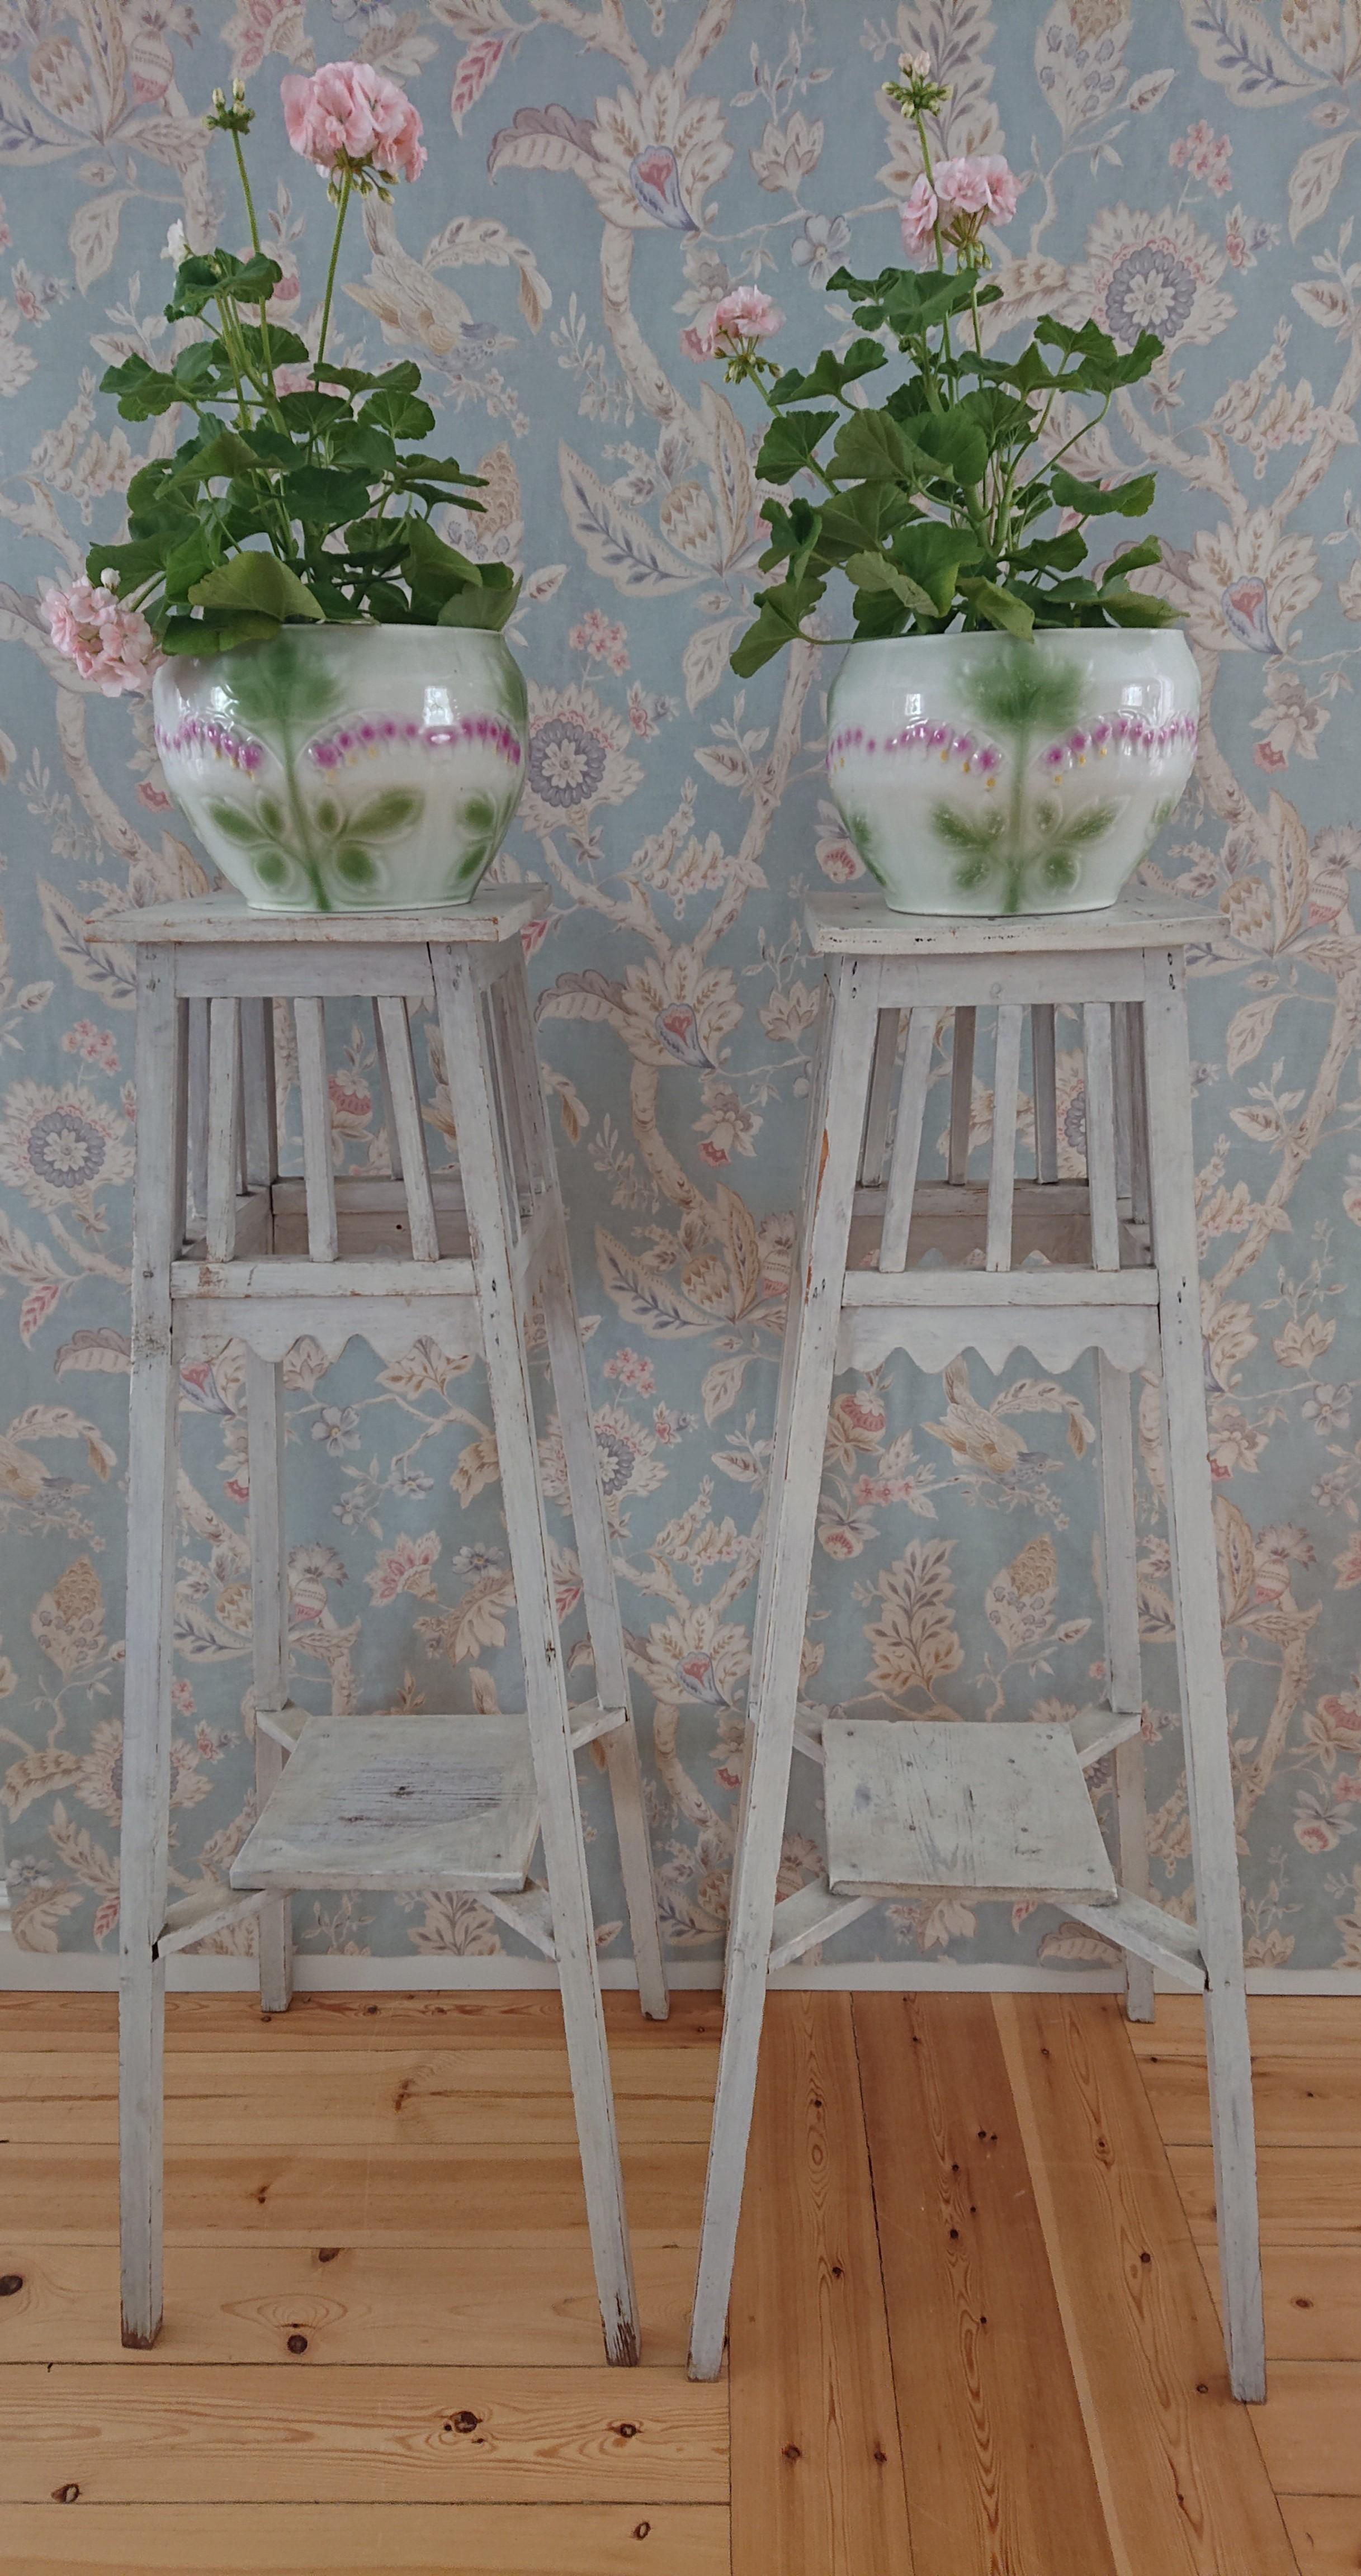 A beautifully pair of 19th century pedestals.
The pedestals has untouched originalpaint.
Beautiful gray color.
Nice details with cut curvature & ribs.
So beautiful with flowers at the top.
The pedestals has a lovely patina.
Good antique